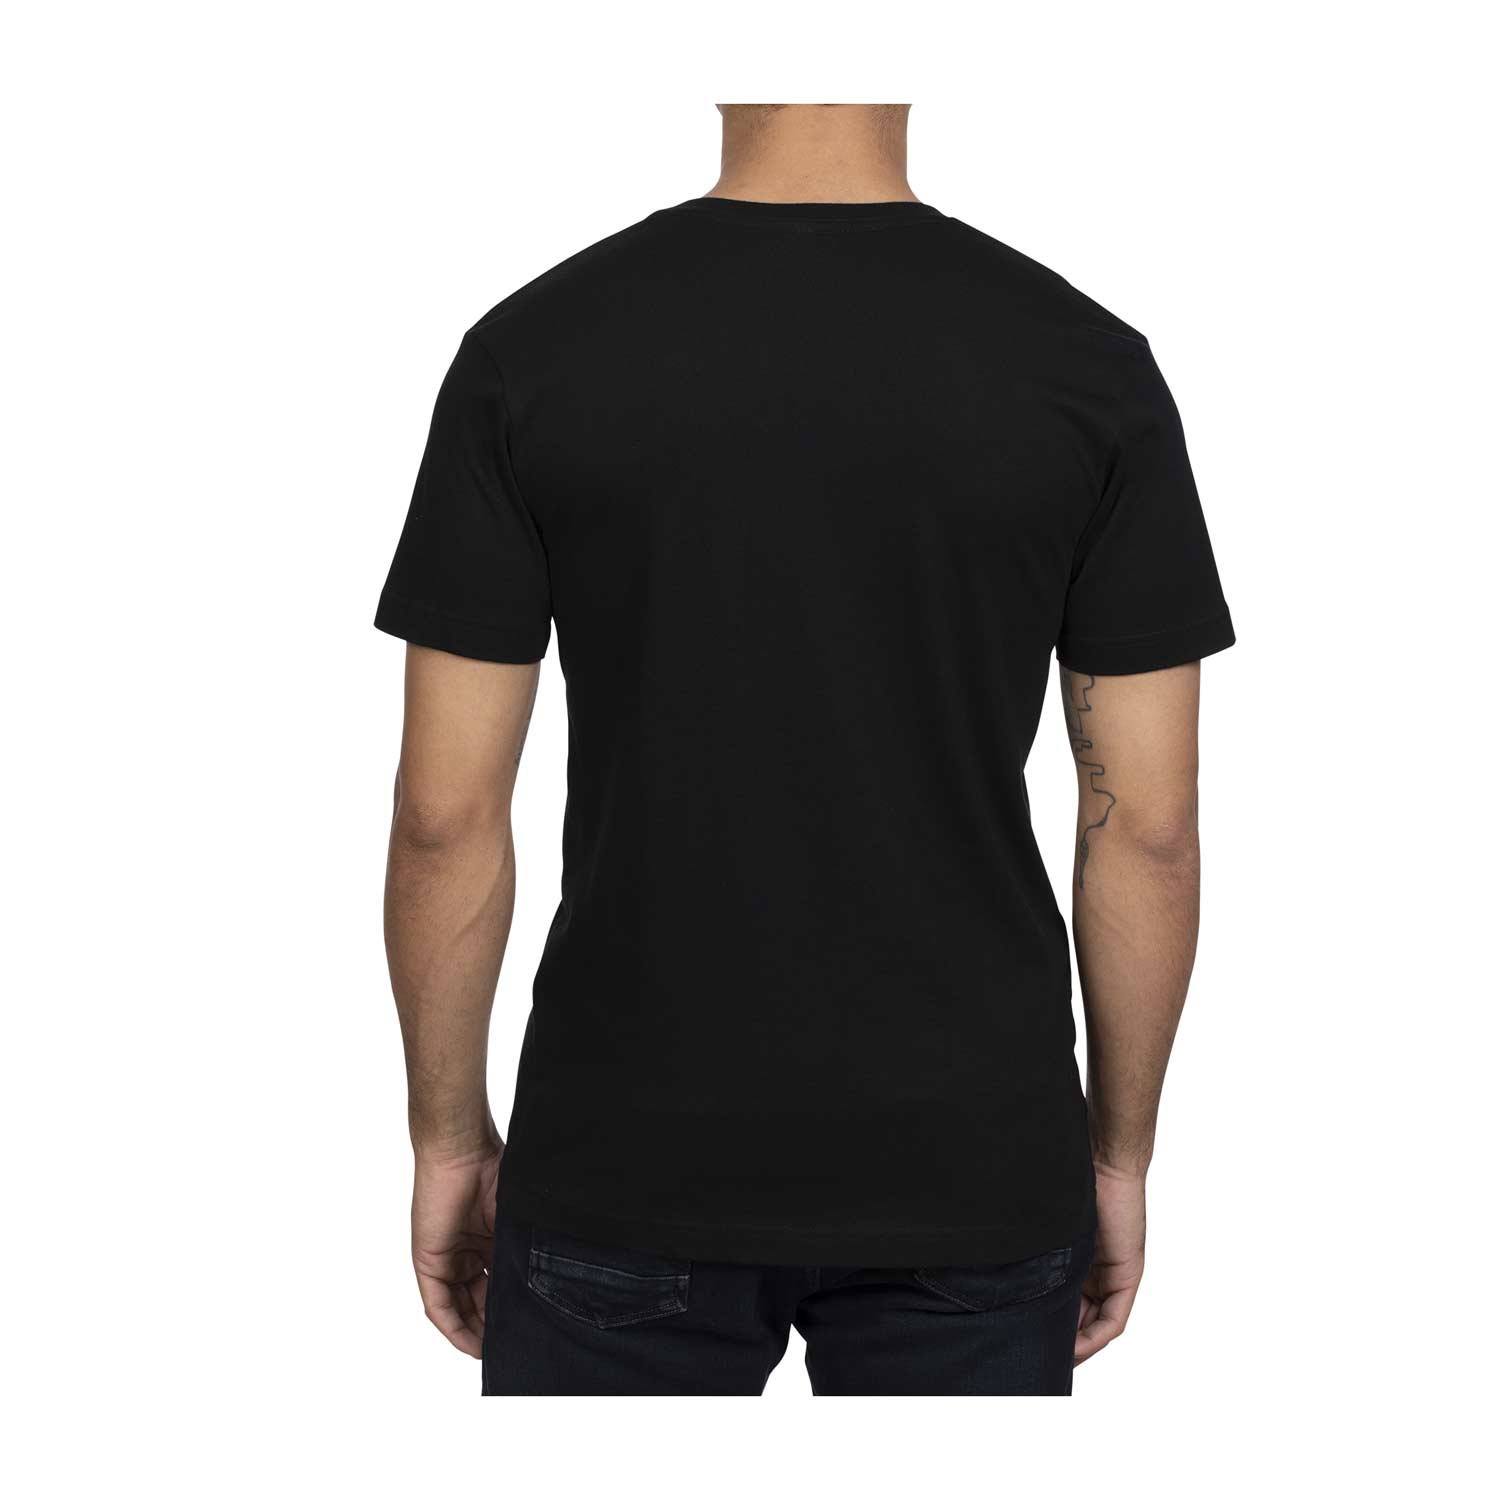 Download Eyes Of Gengar Black Relaxed Fit Crew Neck T Shirt Adult Pokemon Center Official Site